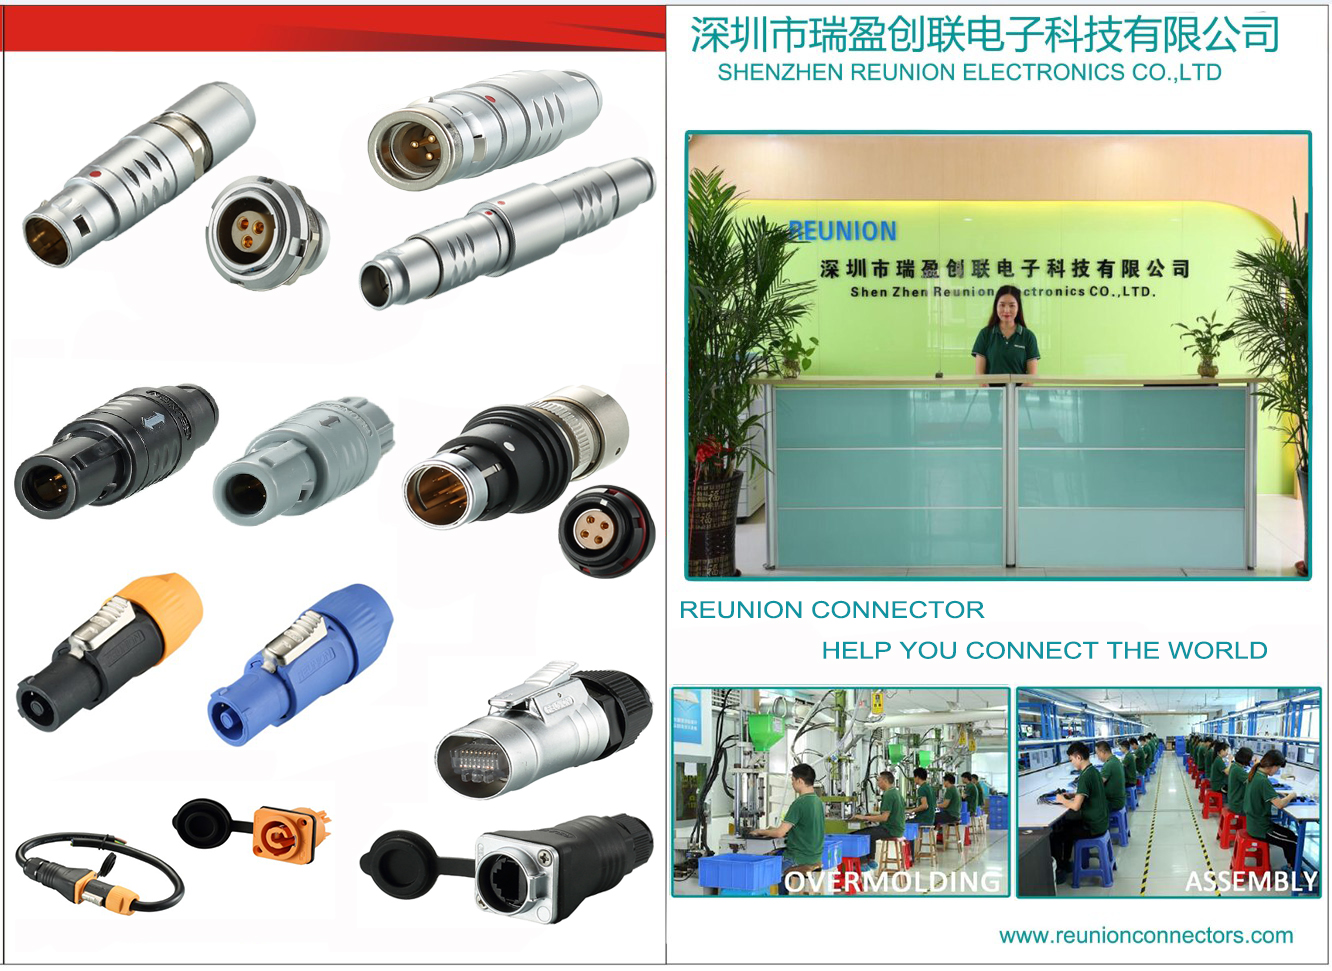 What is the base Environmental performance of push pull self-locking connector? 